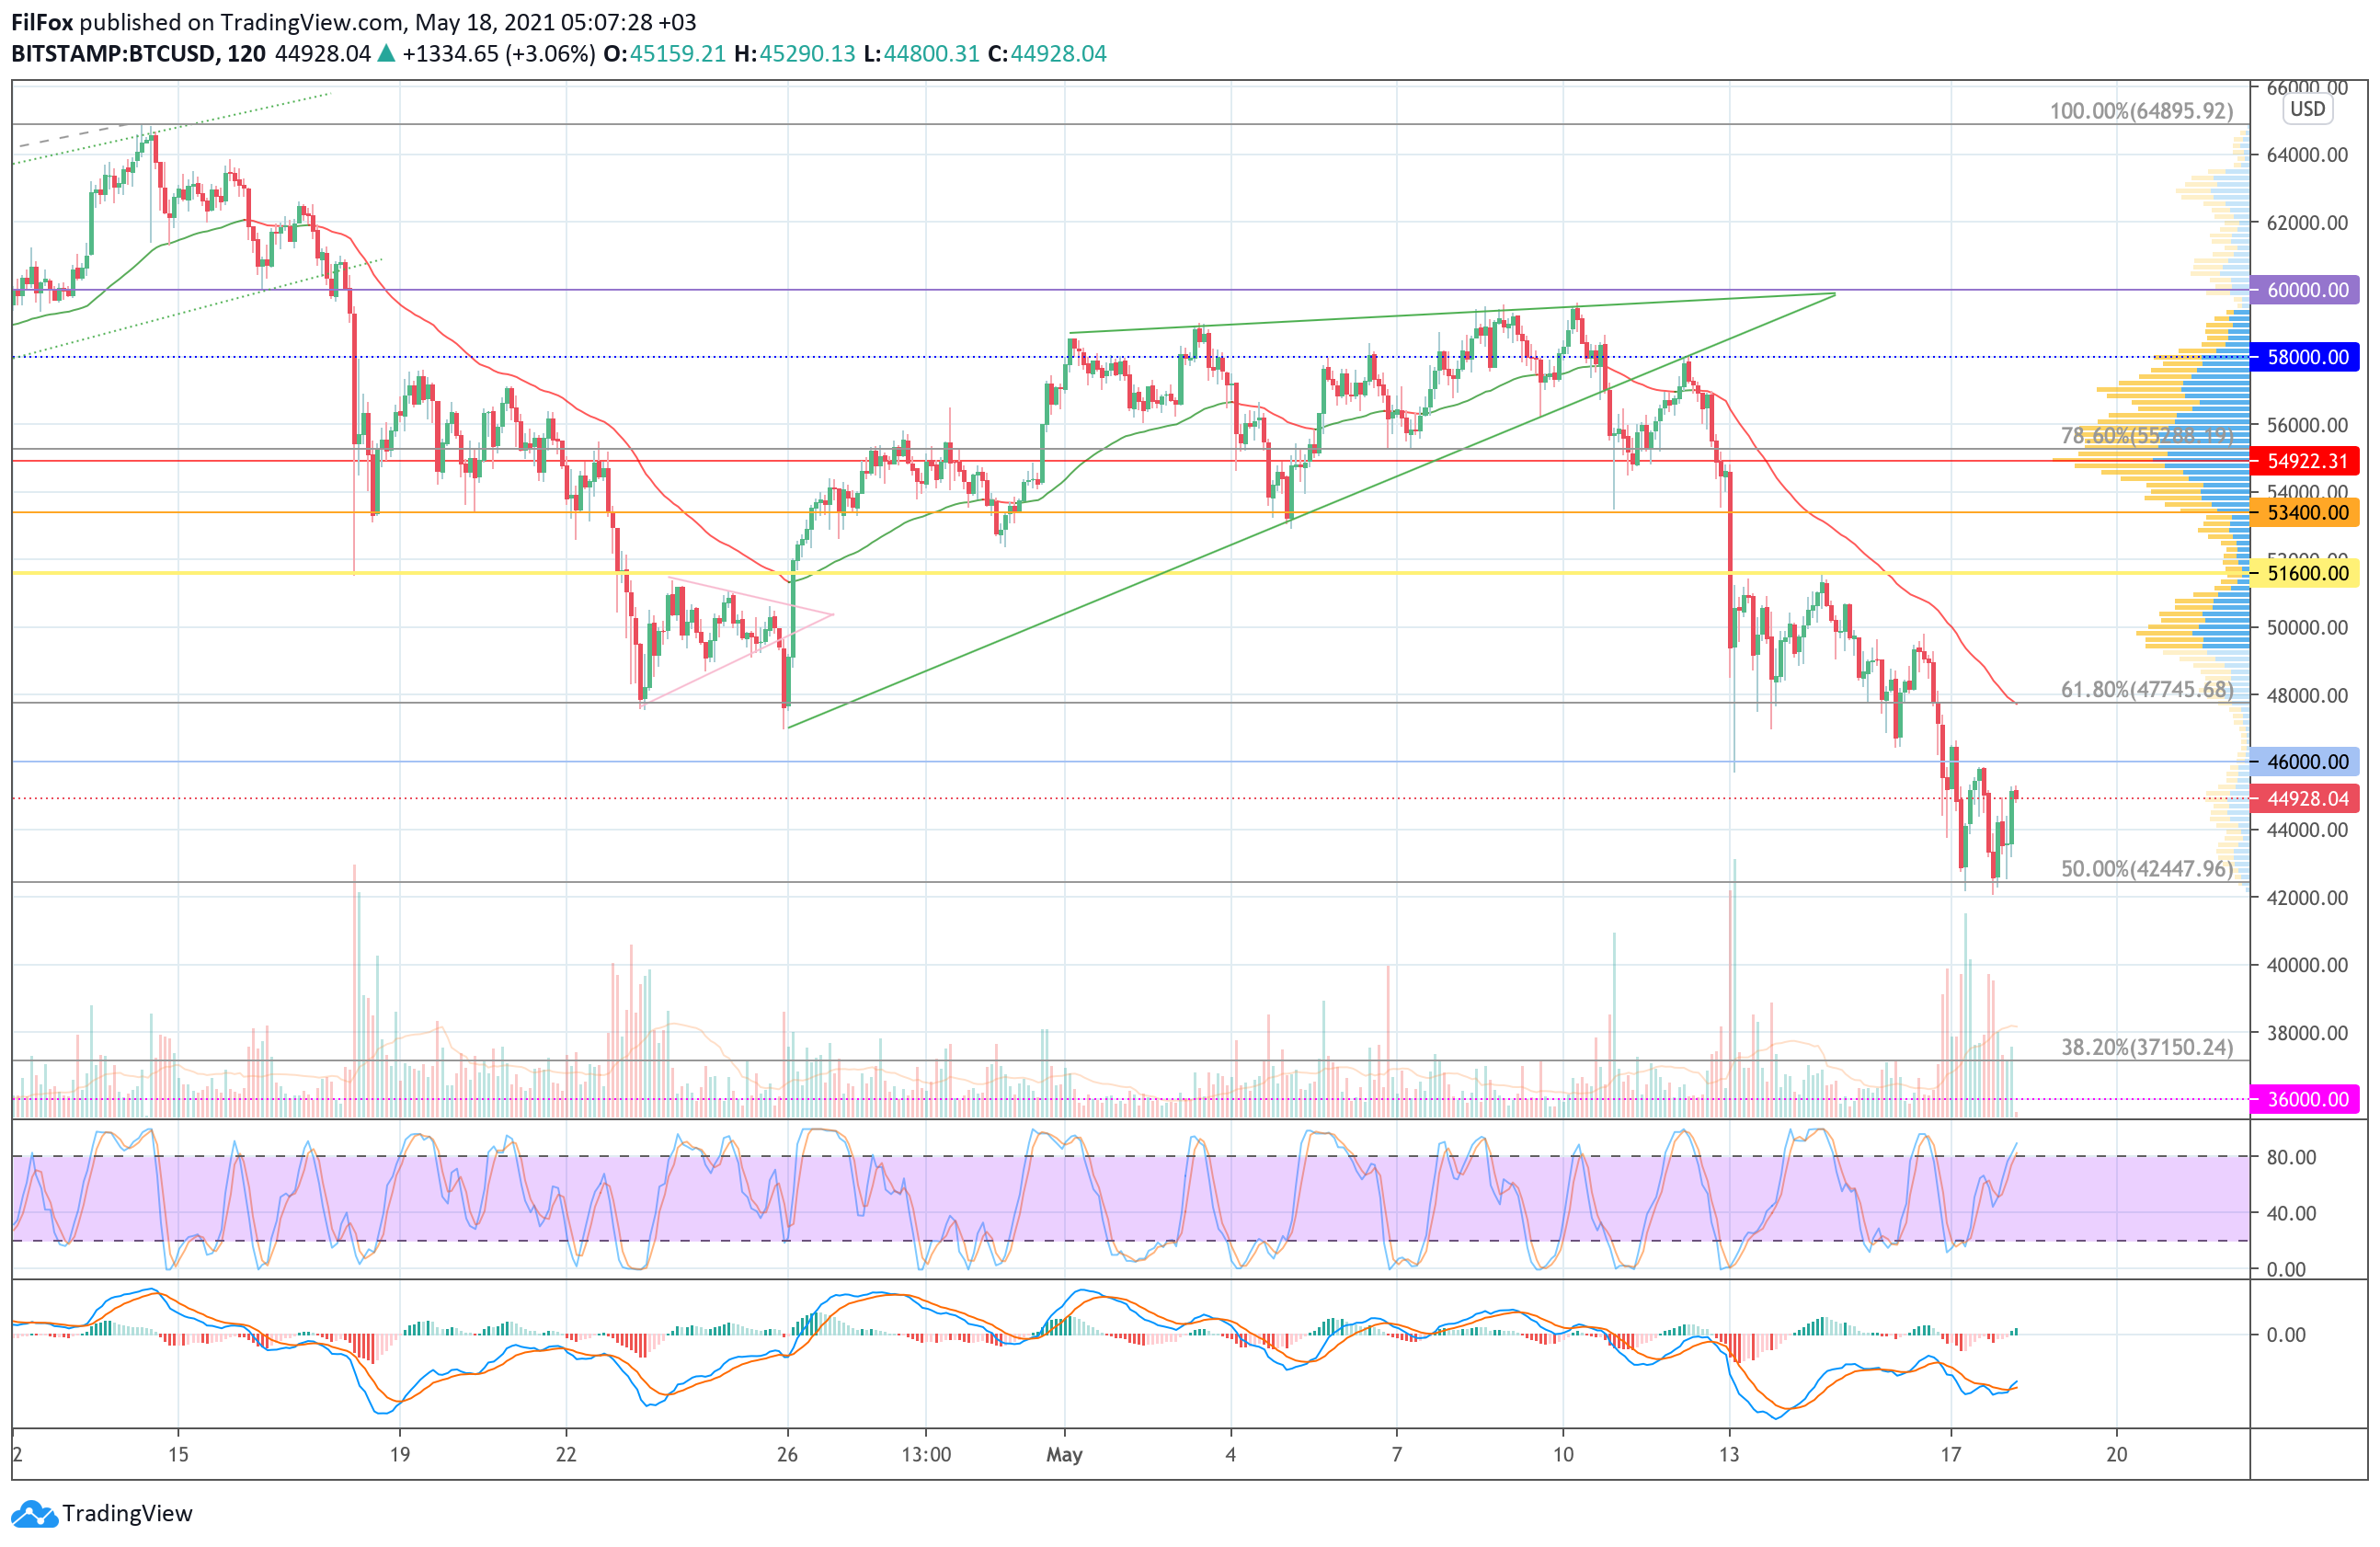 Analysis of the prices of Bitcoin, Ethereum, XRP for 05/18/2021